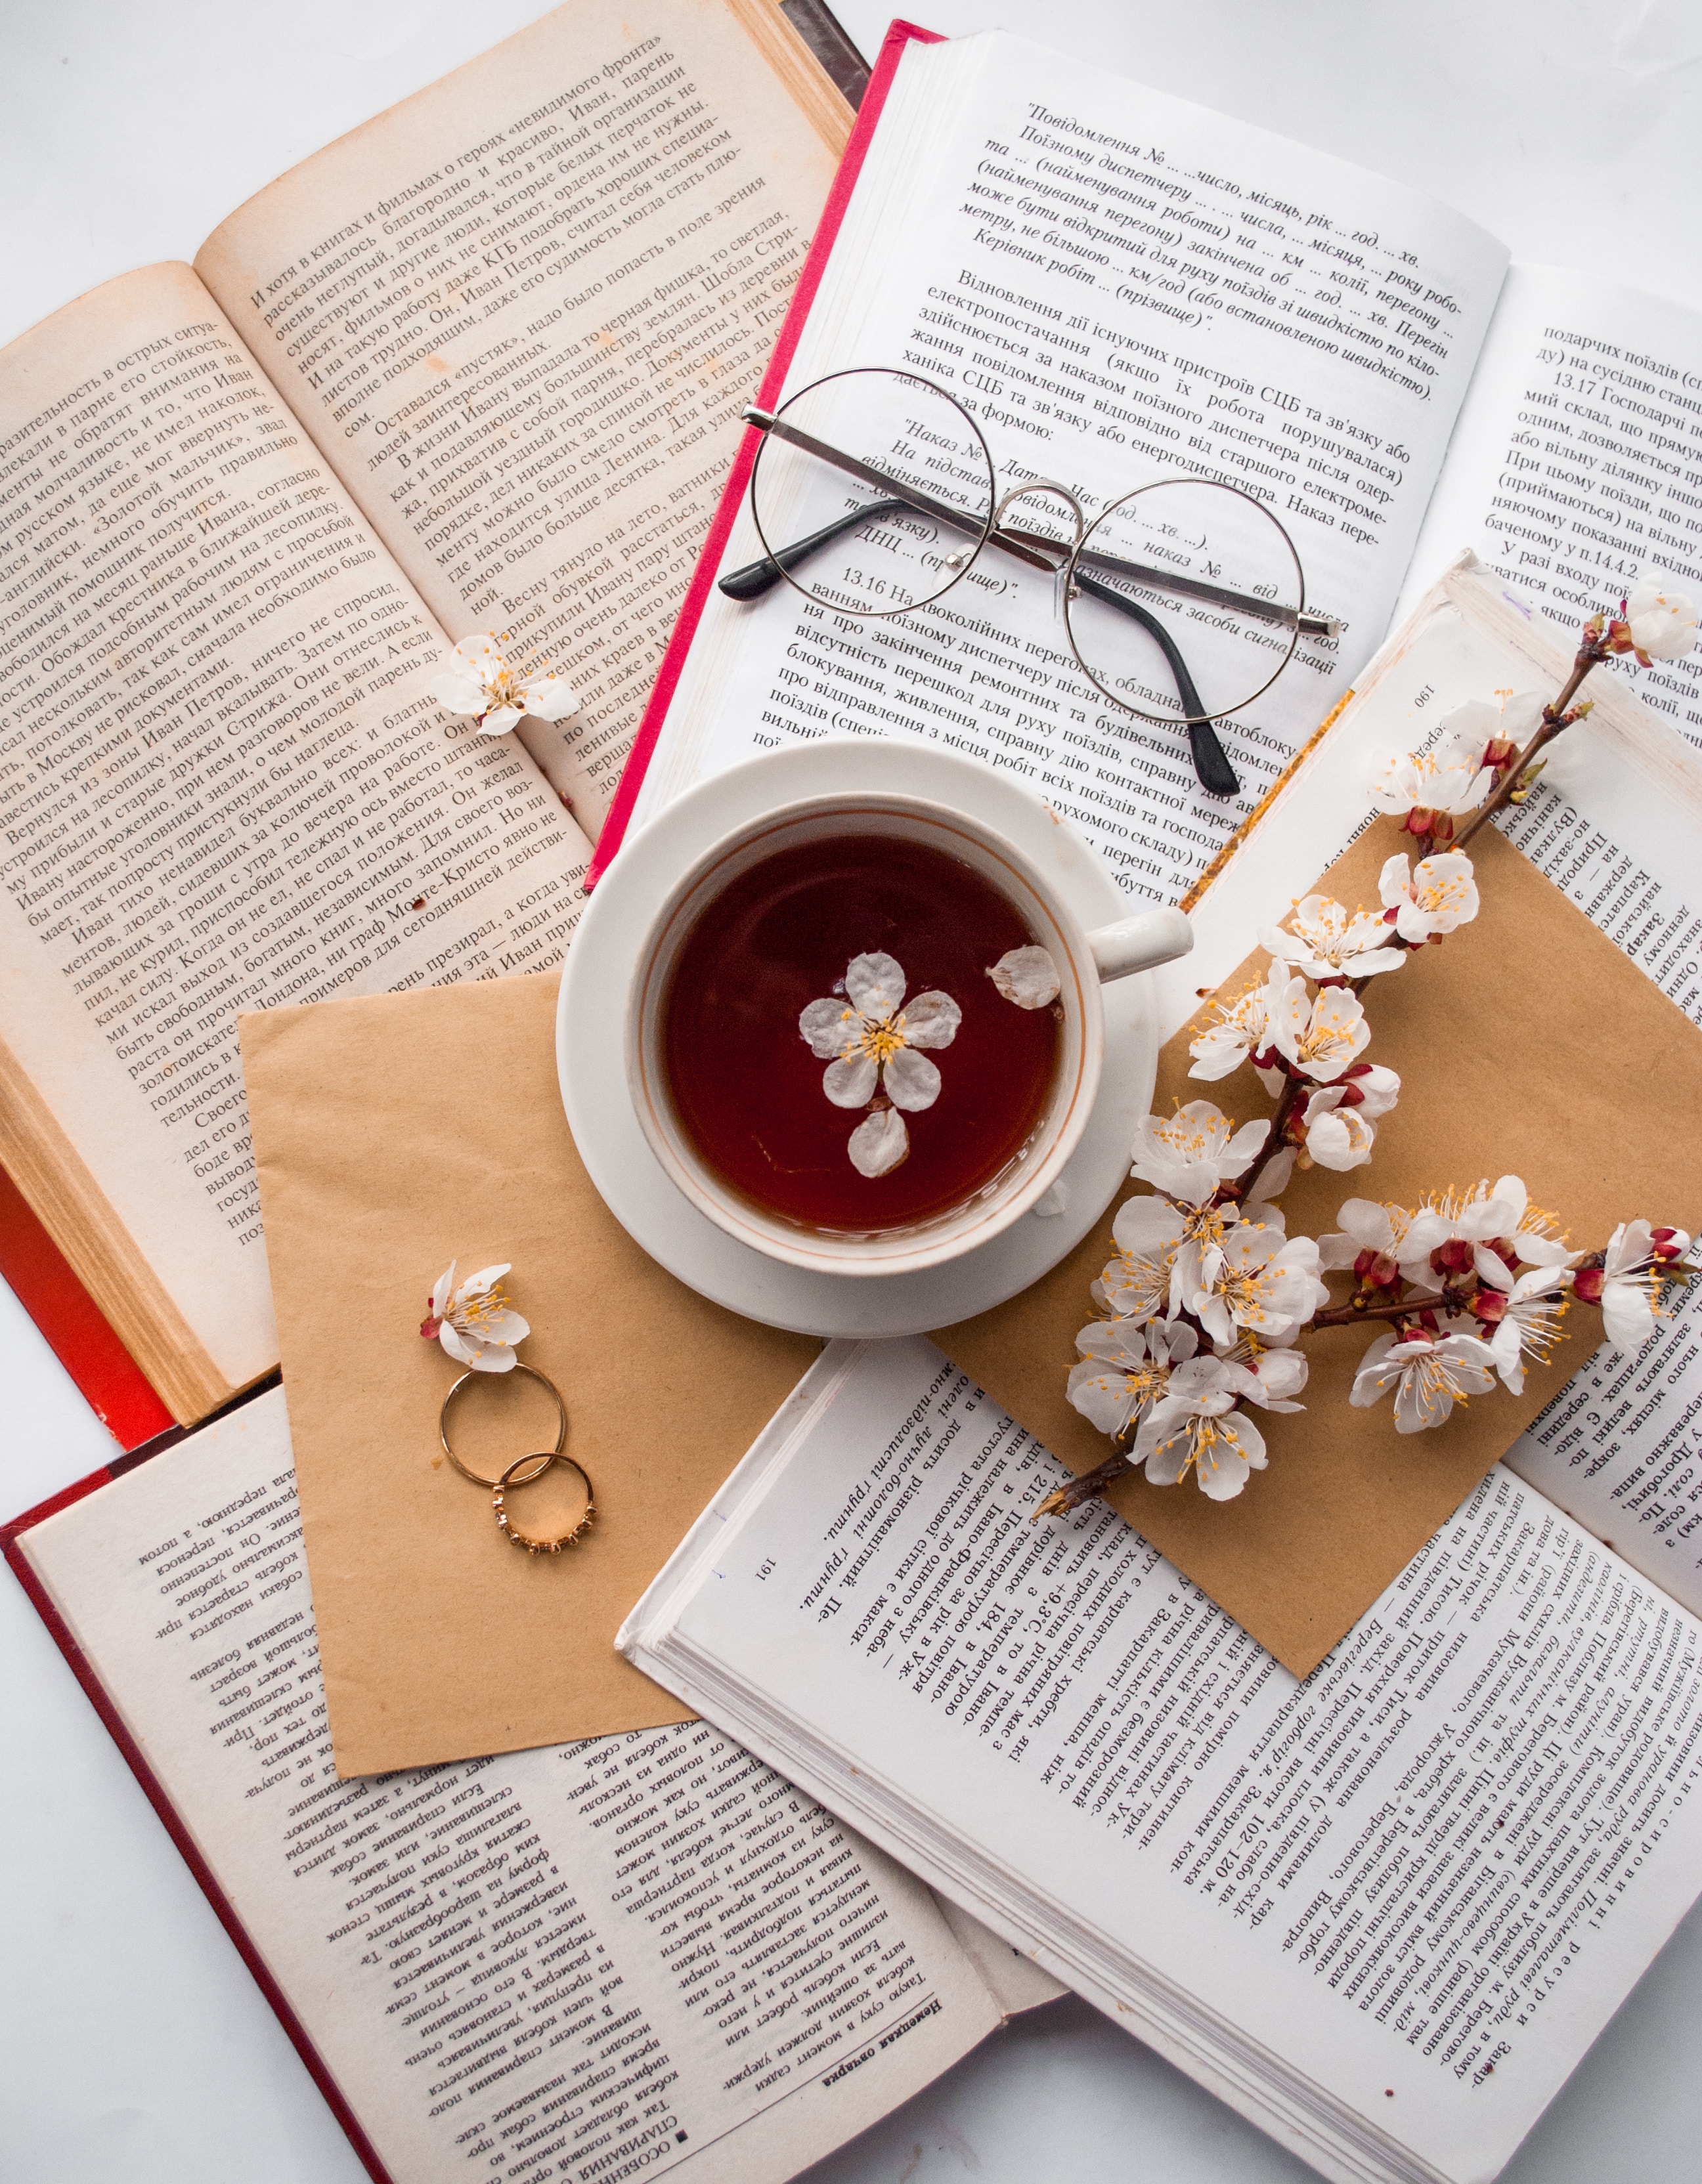 books, flowers, rings, miscellanea, miscellaneous, cup, glasses, spectacles images